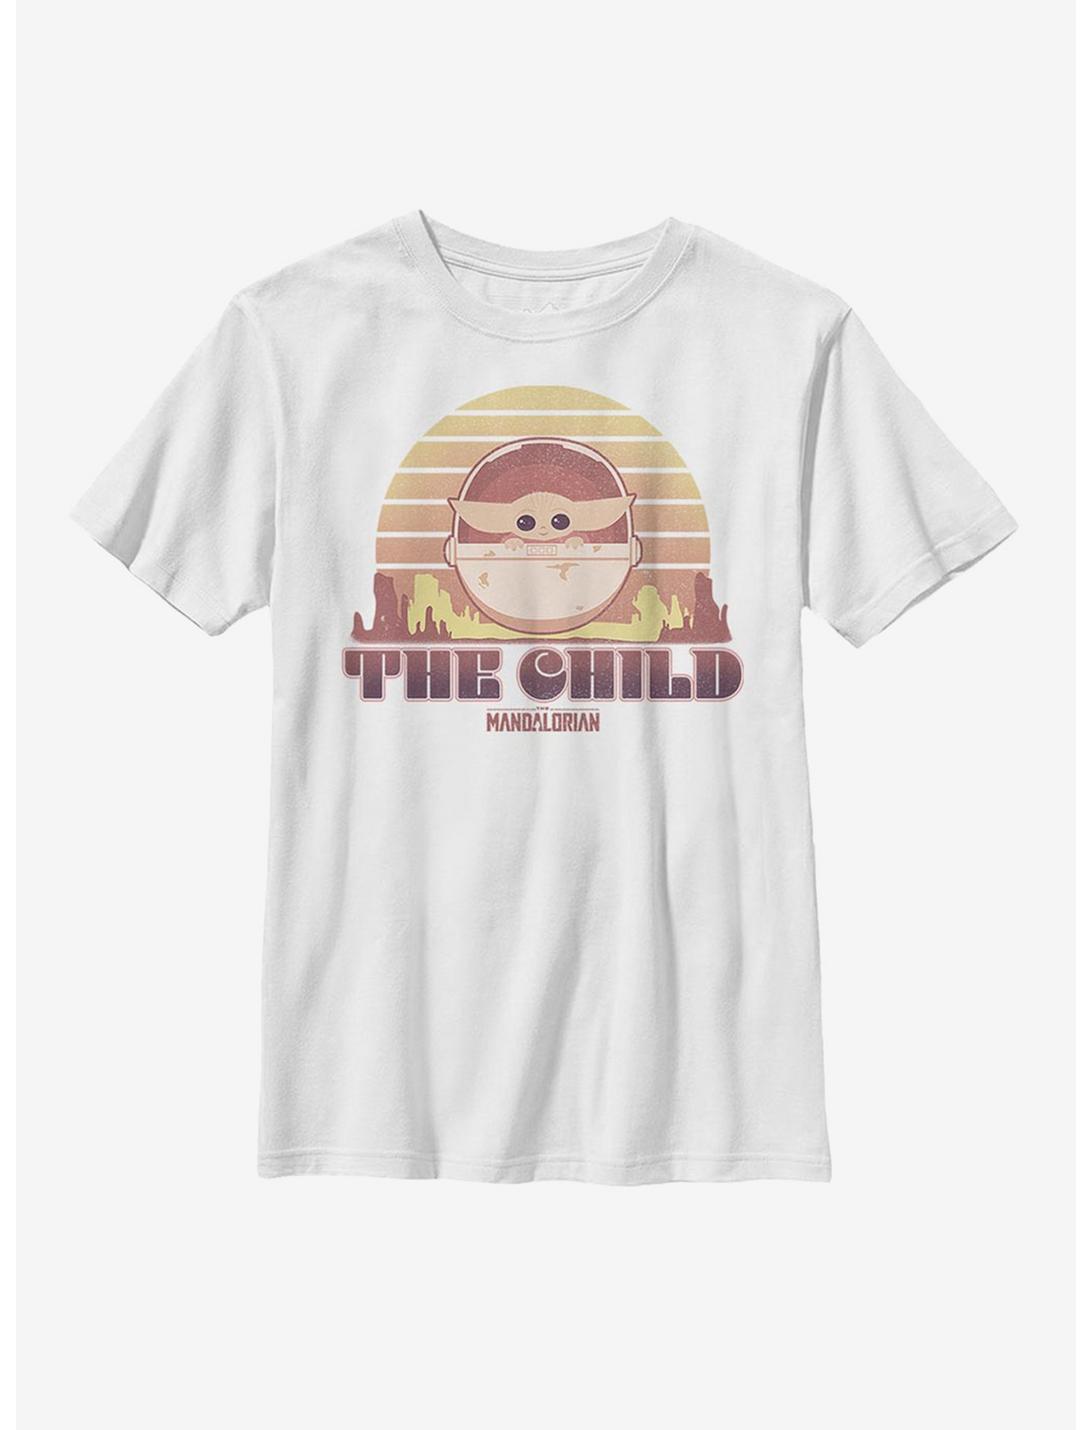 Star Wars The Mandalorian The Child Sunset Youth T-Shirt, WHITE, hi-res